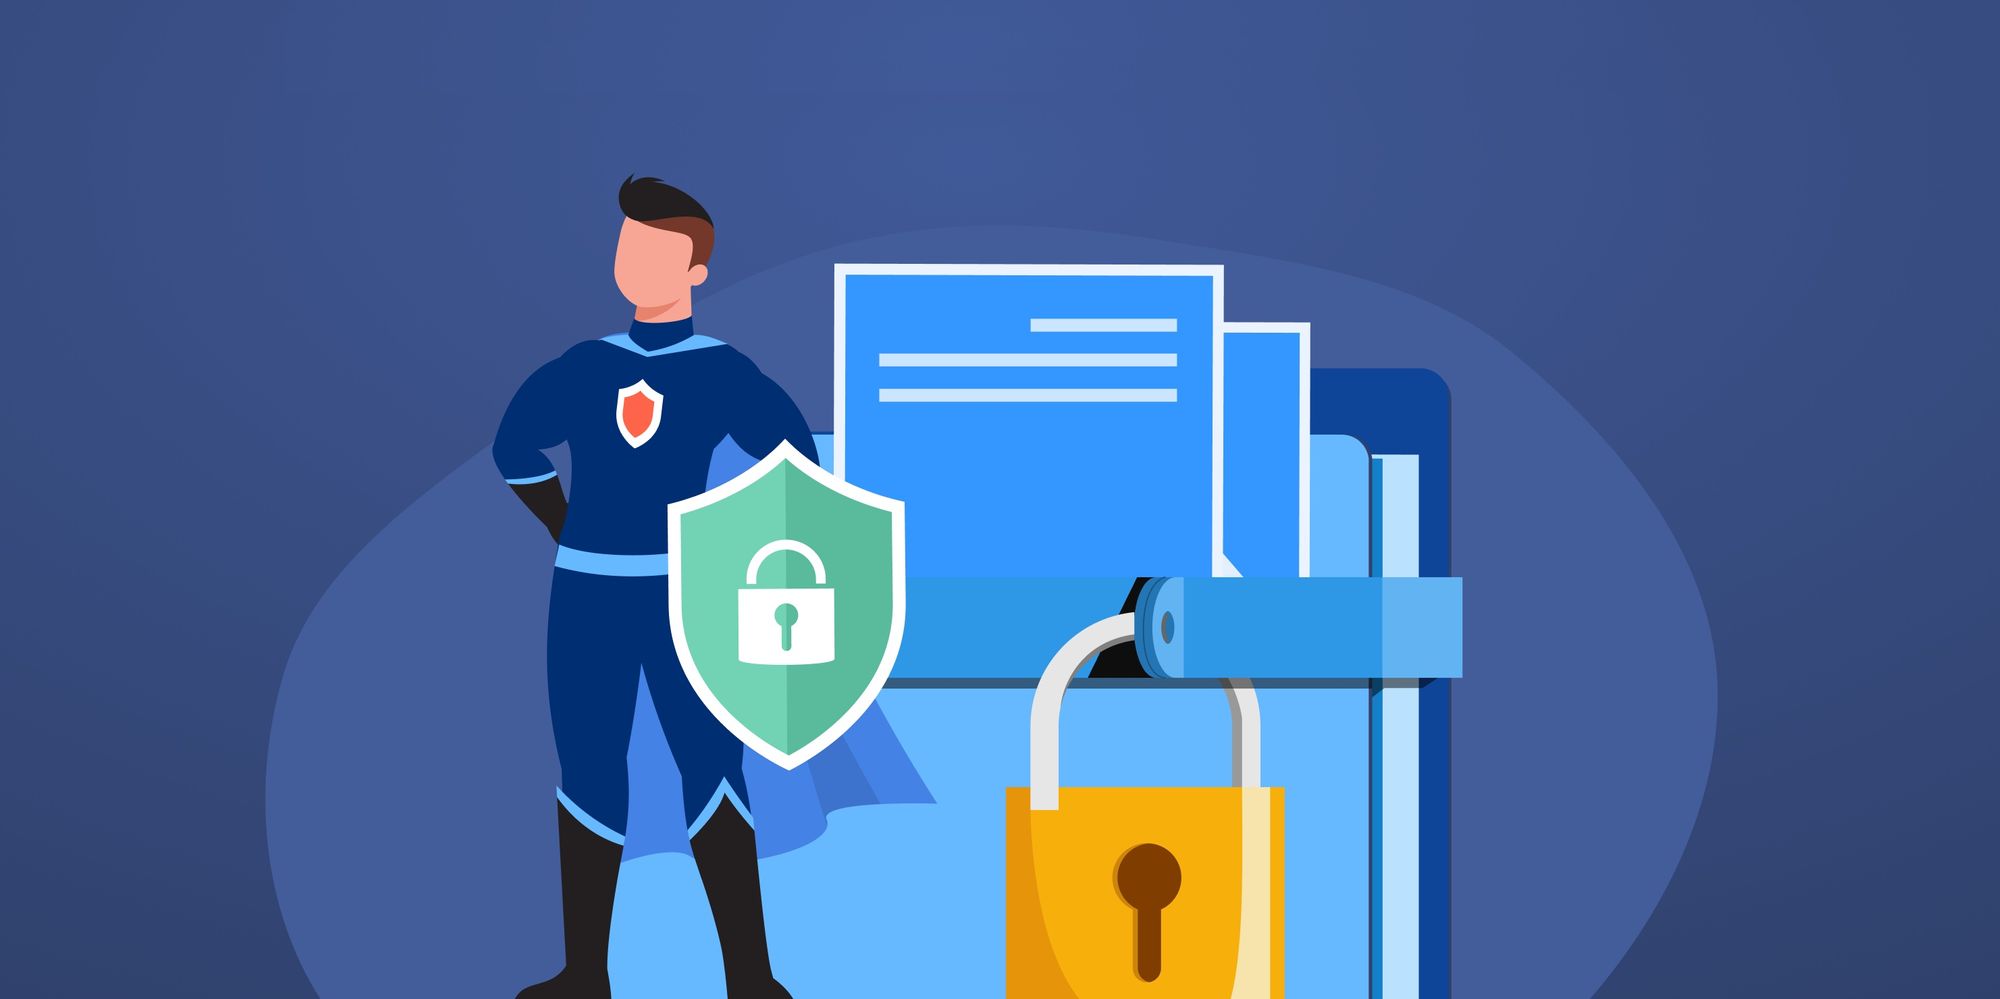 Superhero in blue that stands on the right of locked GDPR documents to protect them